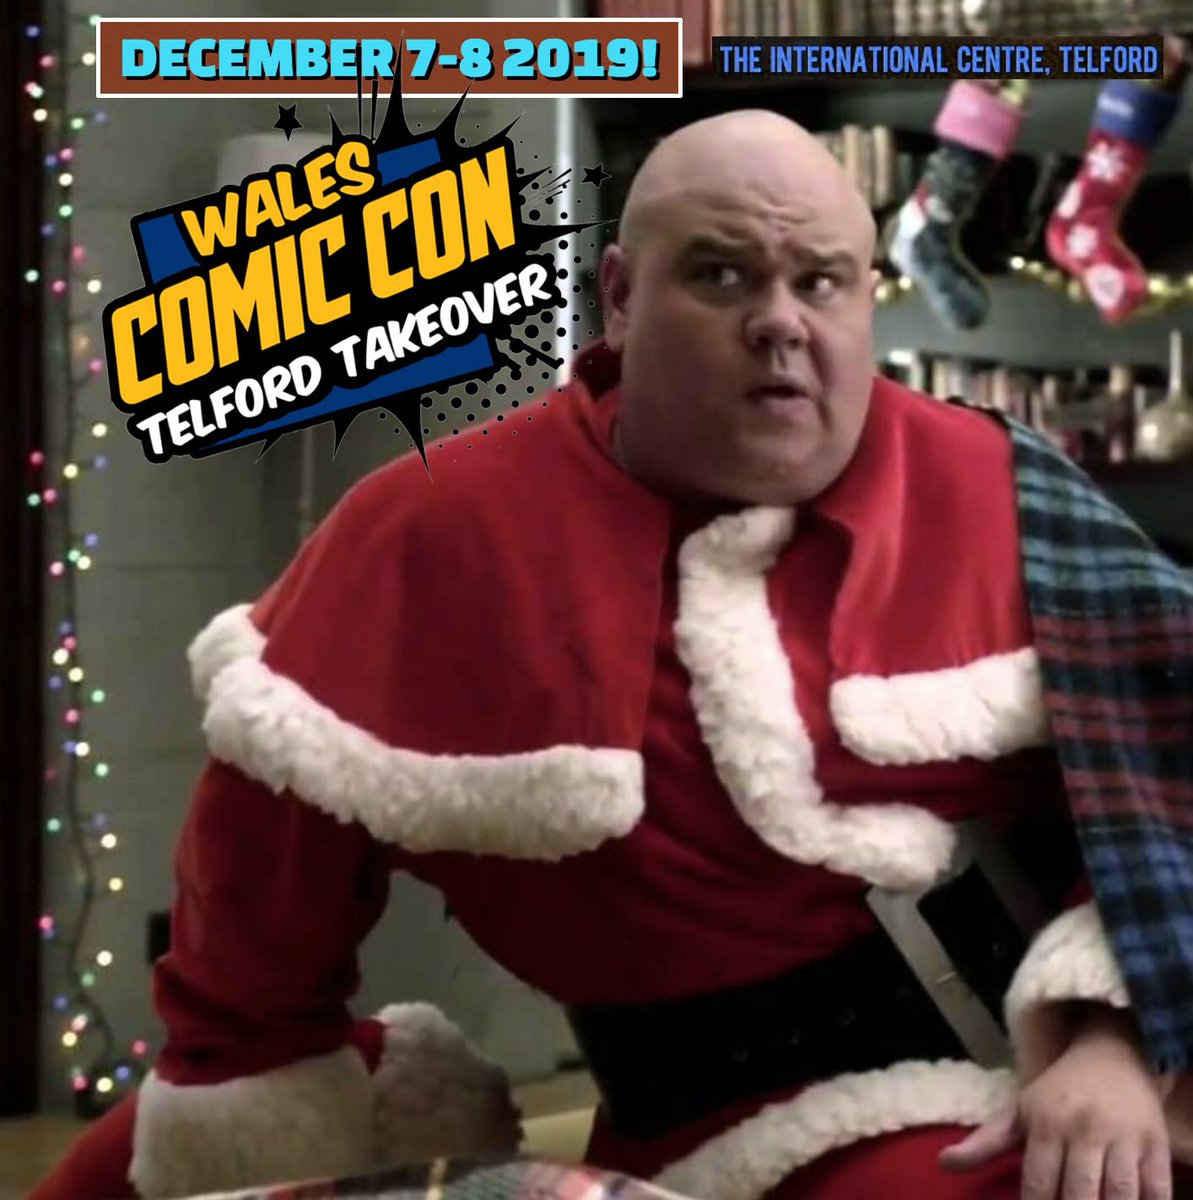 I’m very pleased to announce that I’ll be appearing @walescomiccon ! #paysdegalles